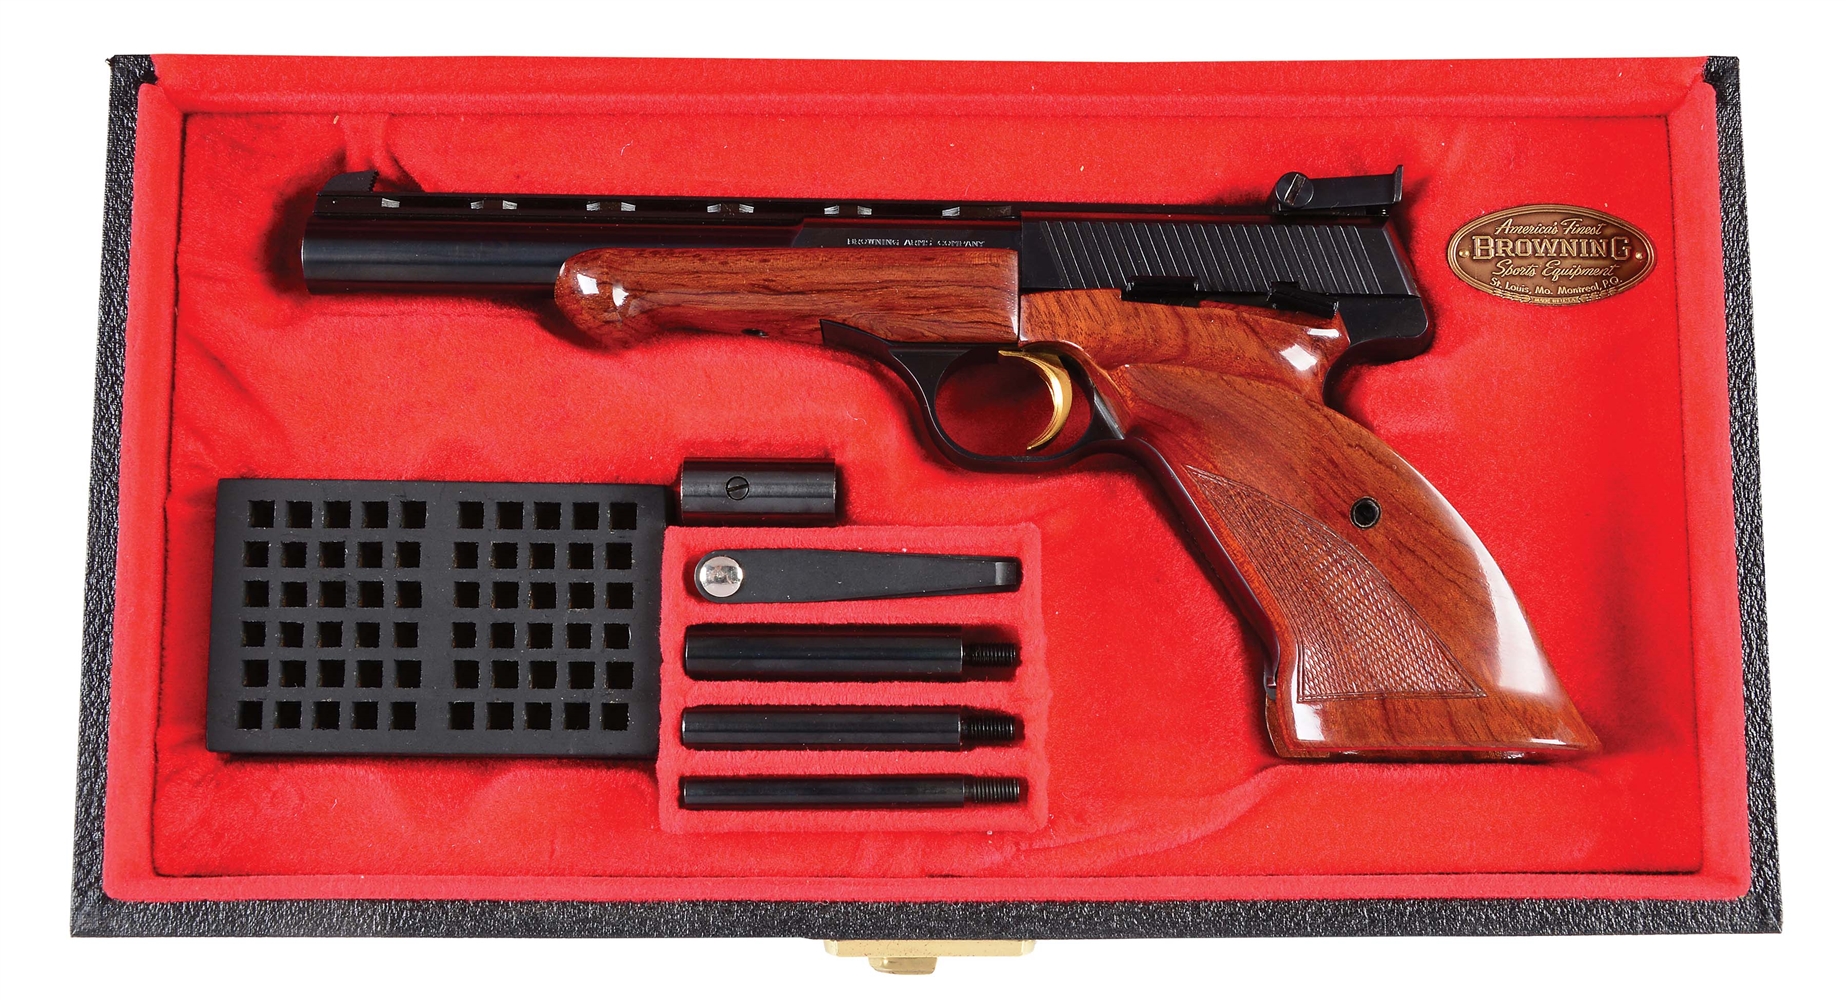 (M) CASED BROWNING MEDALIST SEMI-AUTOMATIC PISTOL.